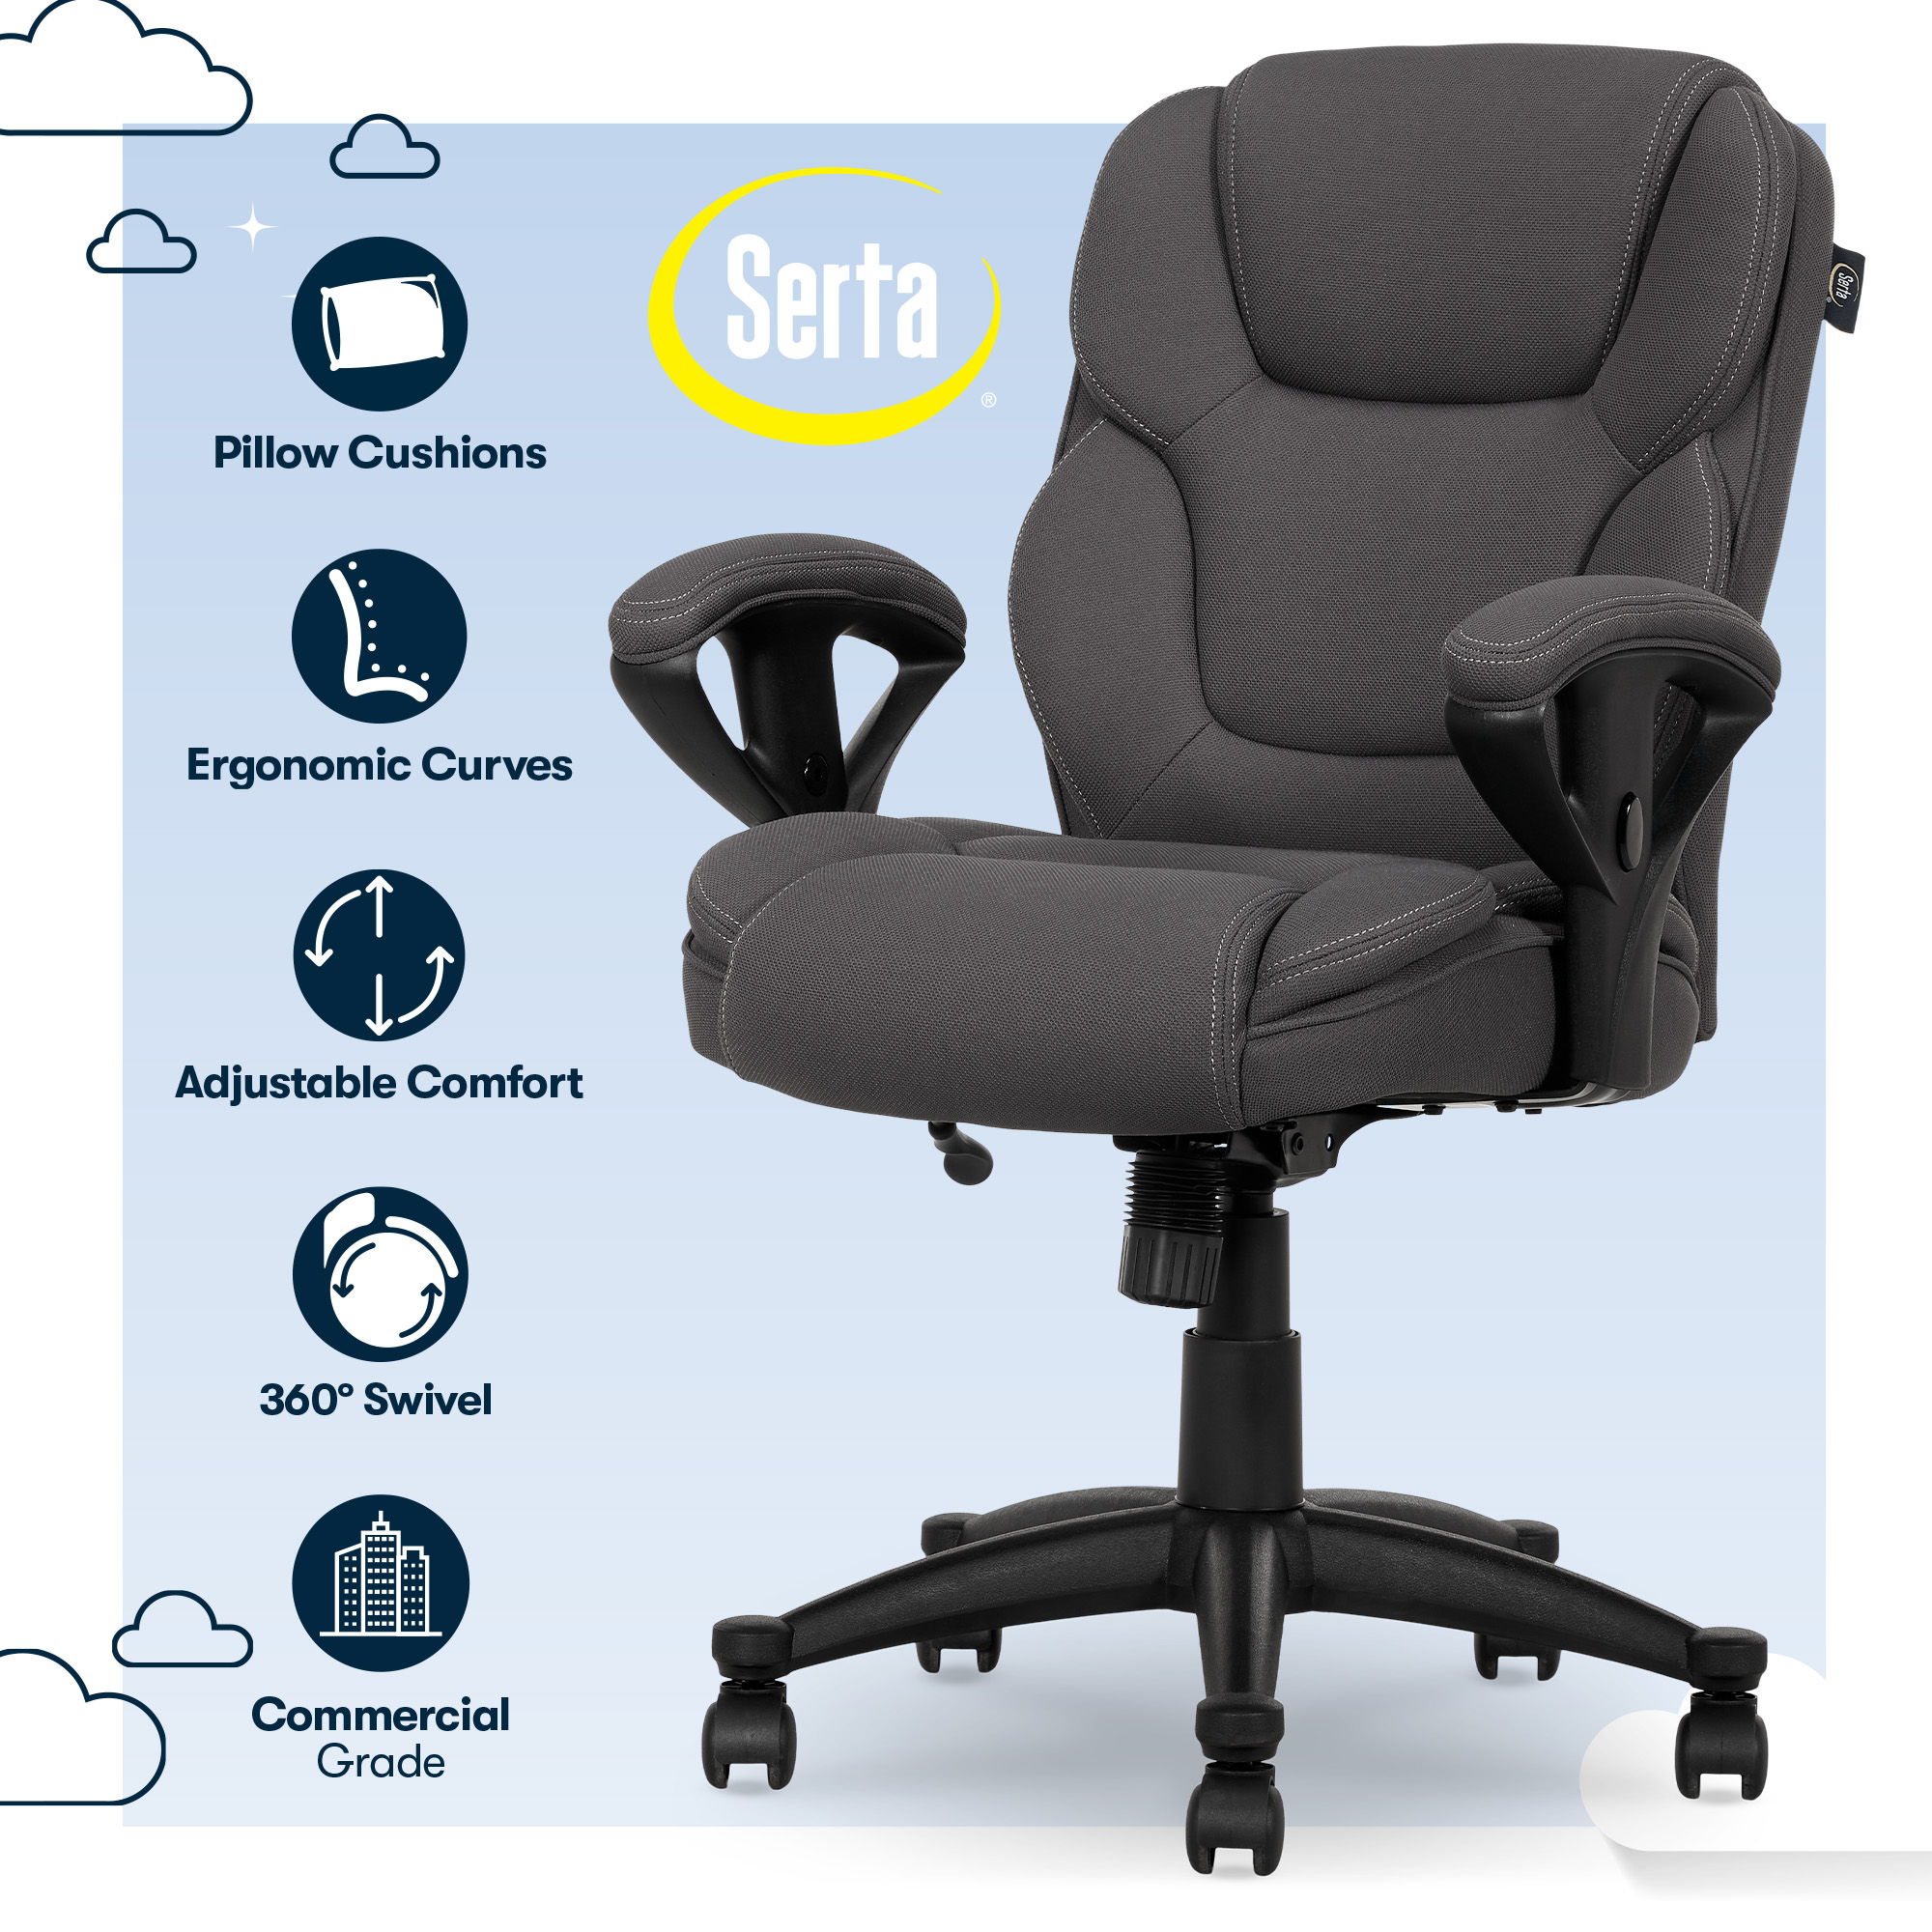 Serta Commercial Grade Task Office Chair, Supports up to 300 lbs., Dark Gray - image 2 of 15